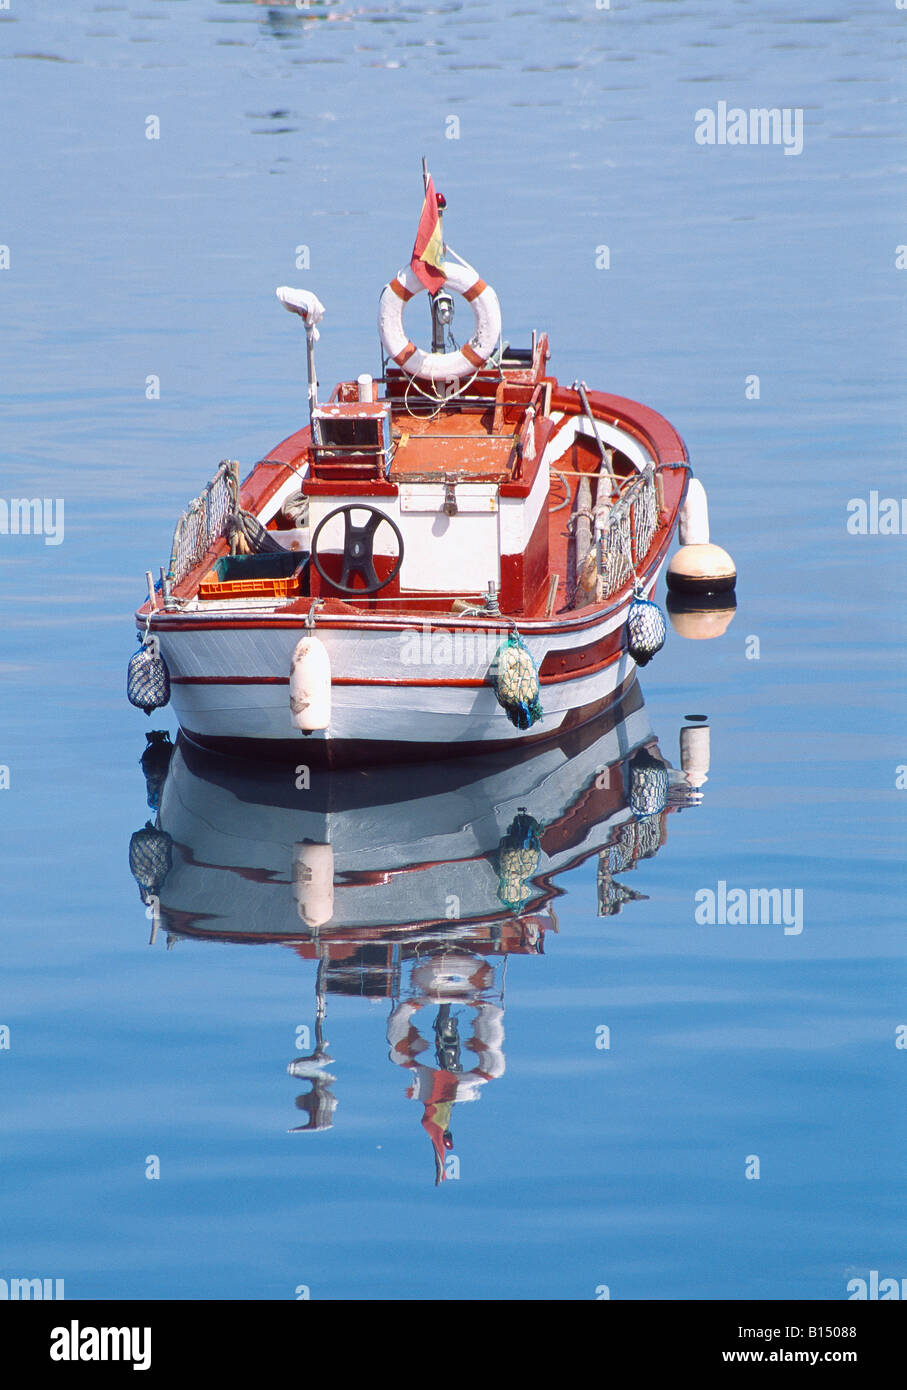 Boat and its reflection on water. Finisterre. La Coruña province. Galicia. Spain. Stock Photo